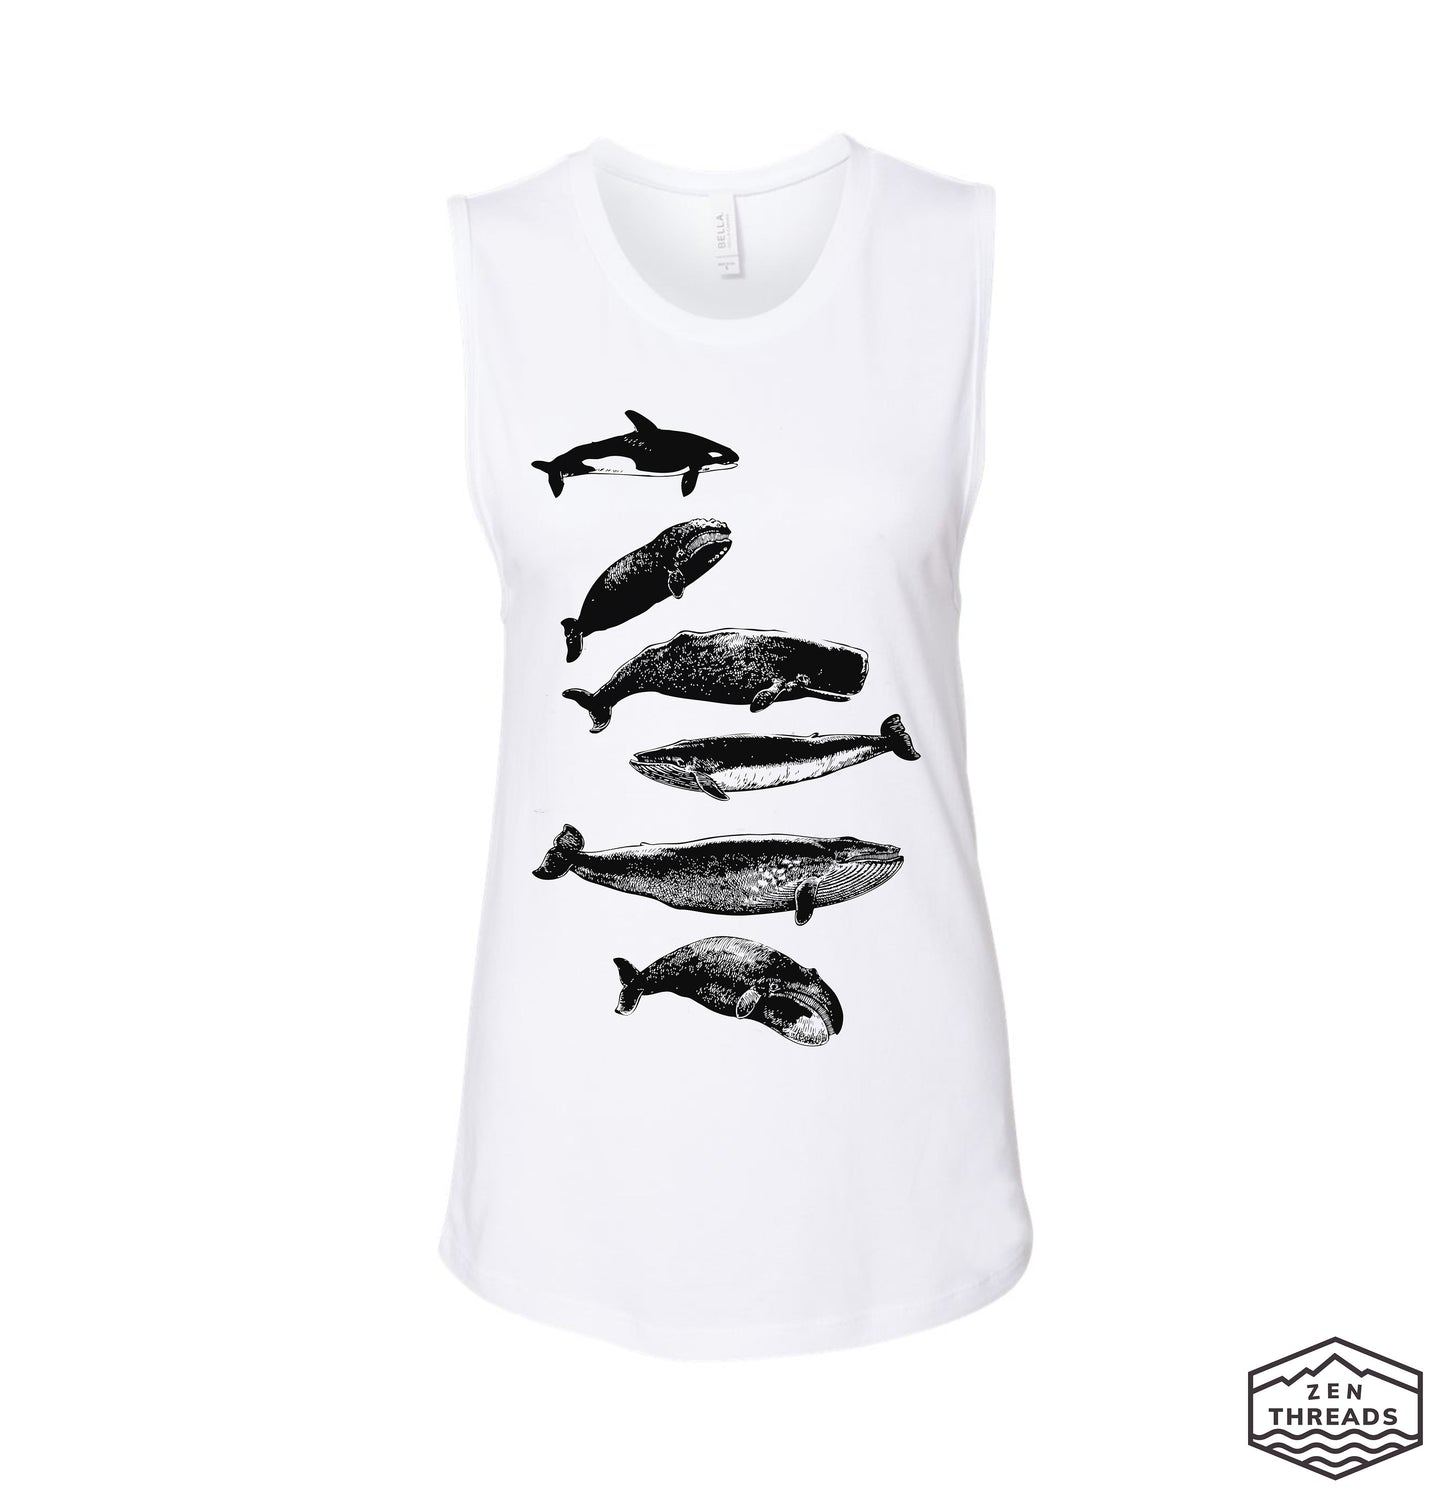 Womens WHALES Muscle Tank workout fitness tee ocean lover big fish waves top t-shirt beach apparel ladies sleeveless top orca whale watching